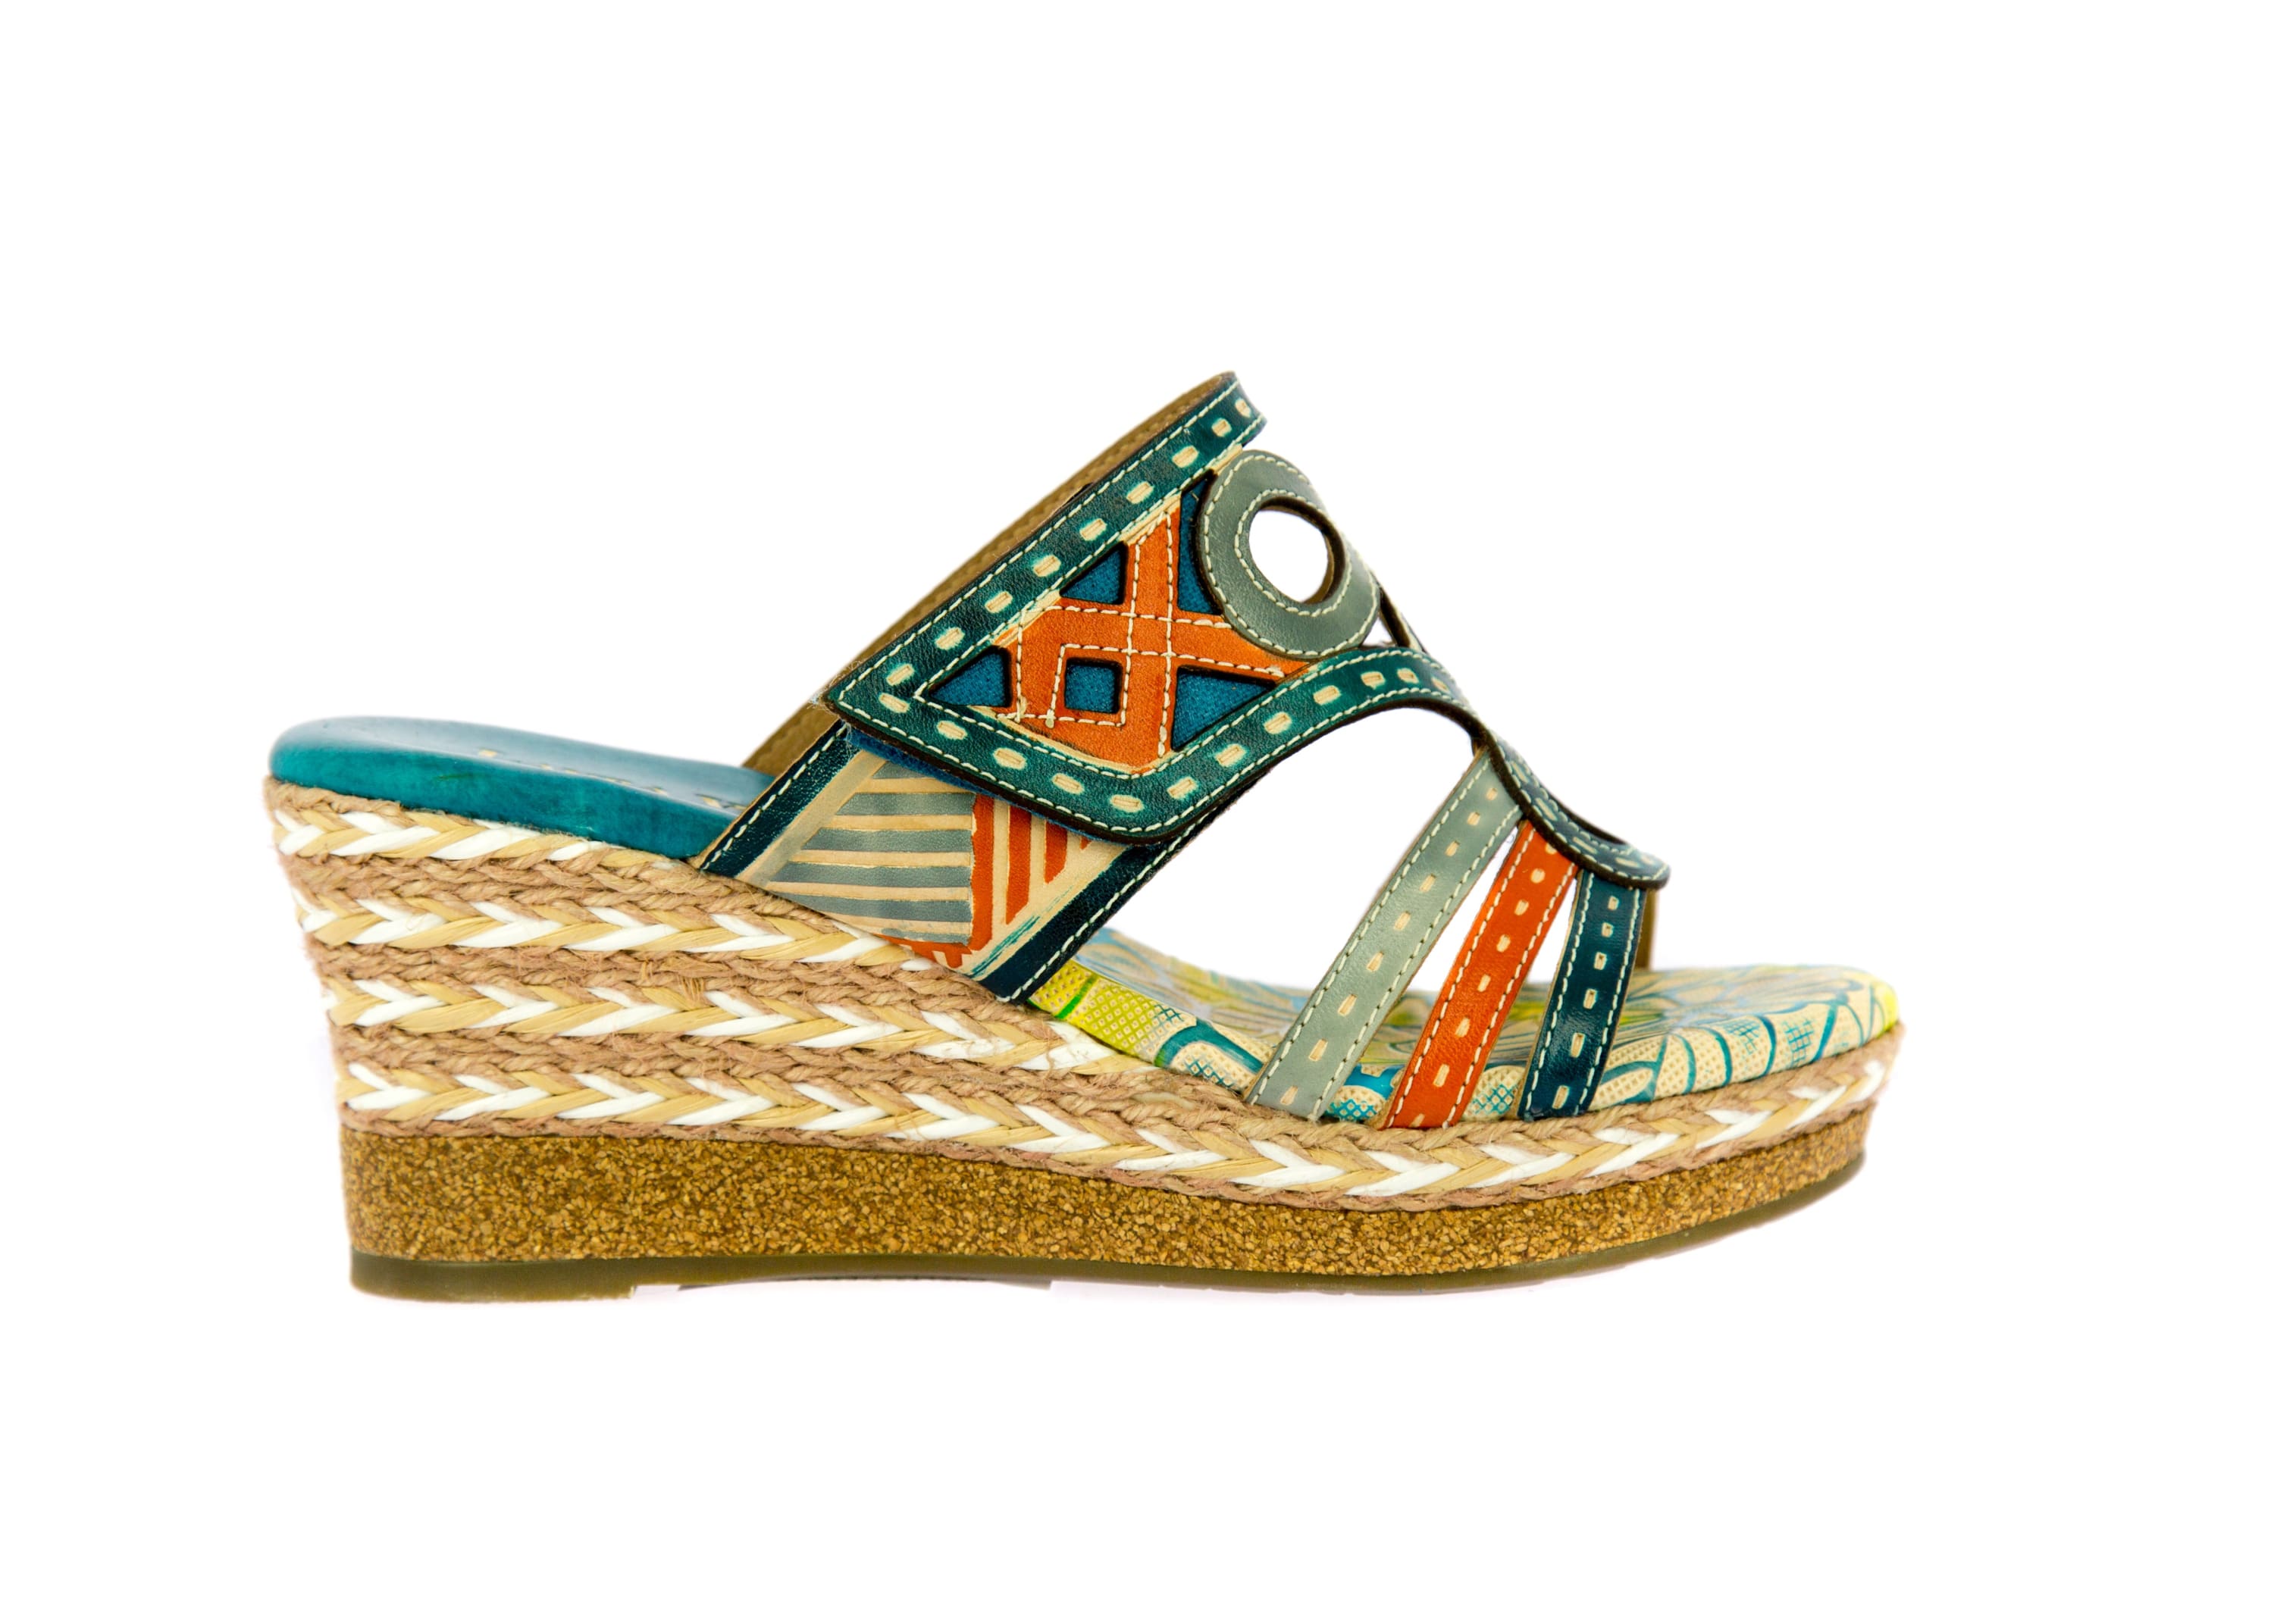 Chaussures DAUPHIN 02 - 35 / Turquoise - Mule